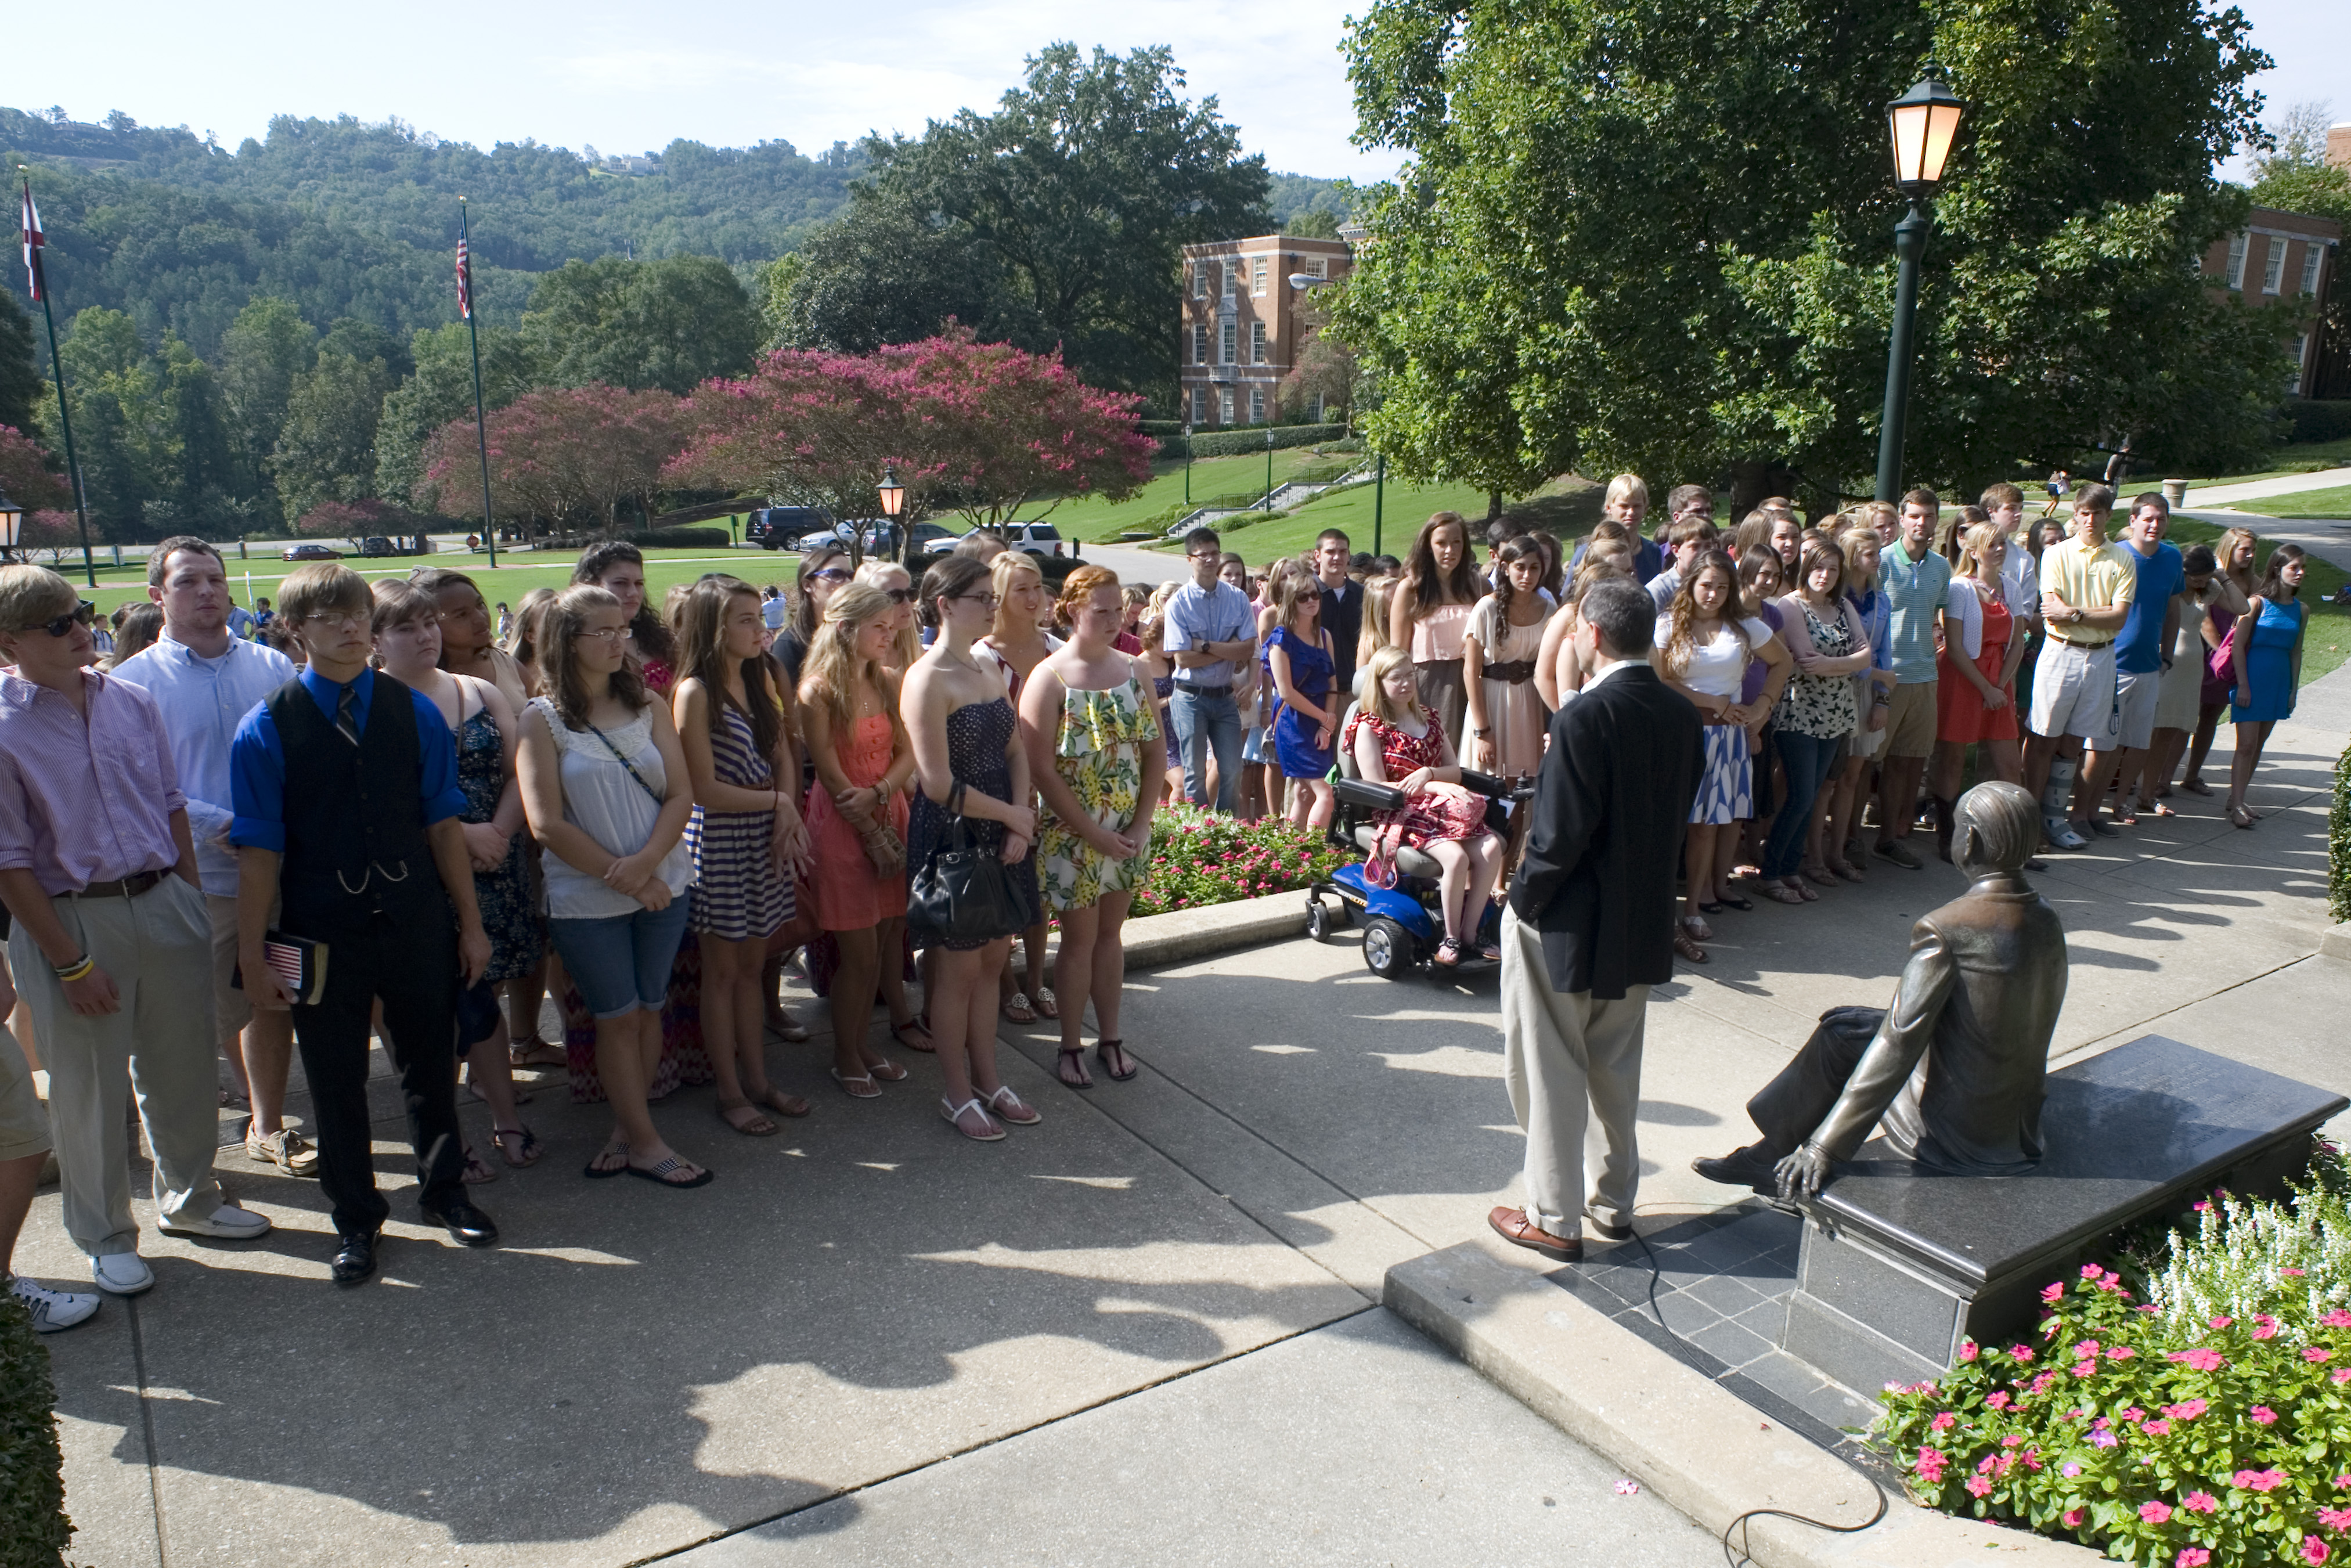 President Westmoreland welcomes students